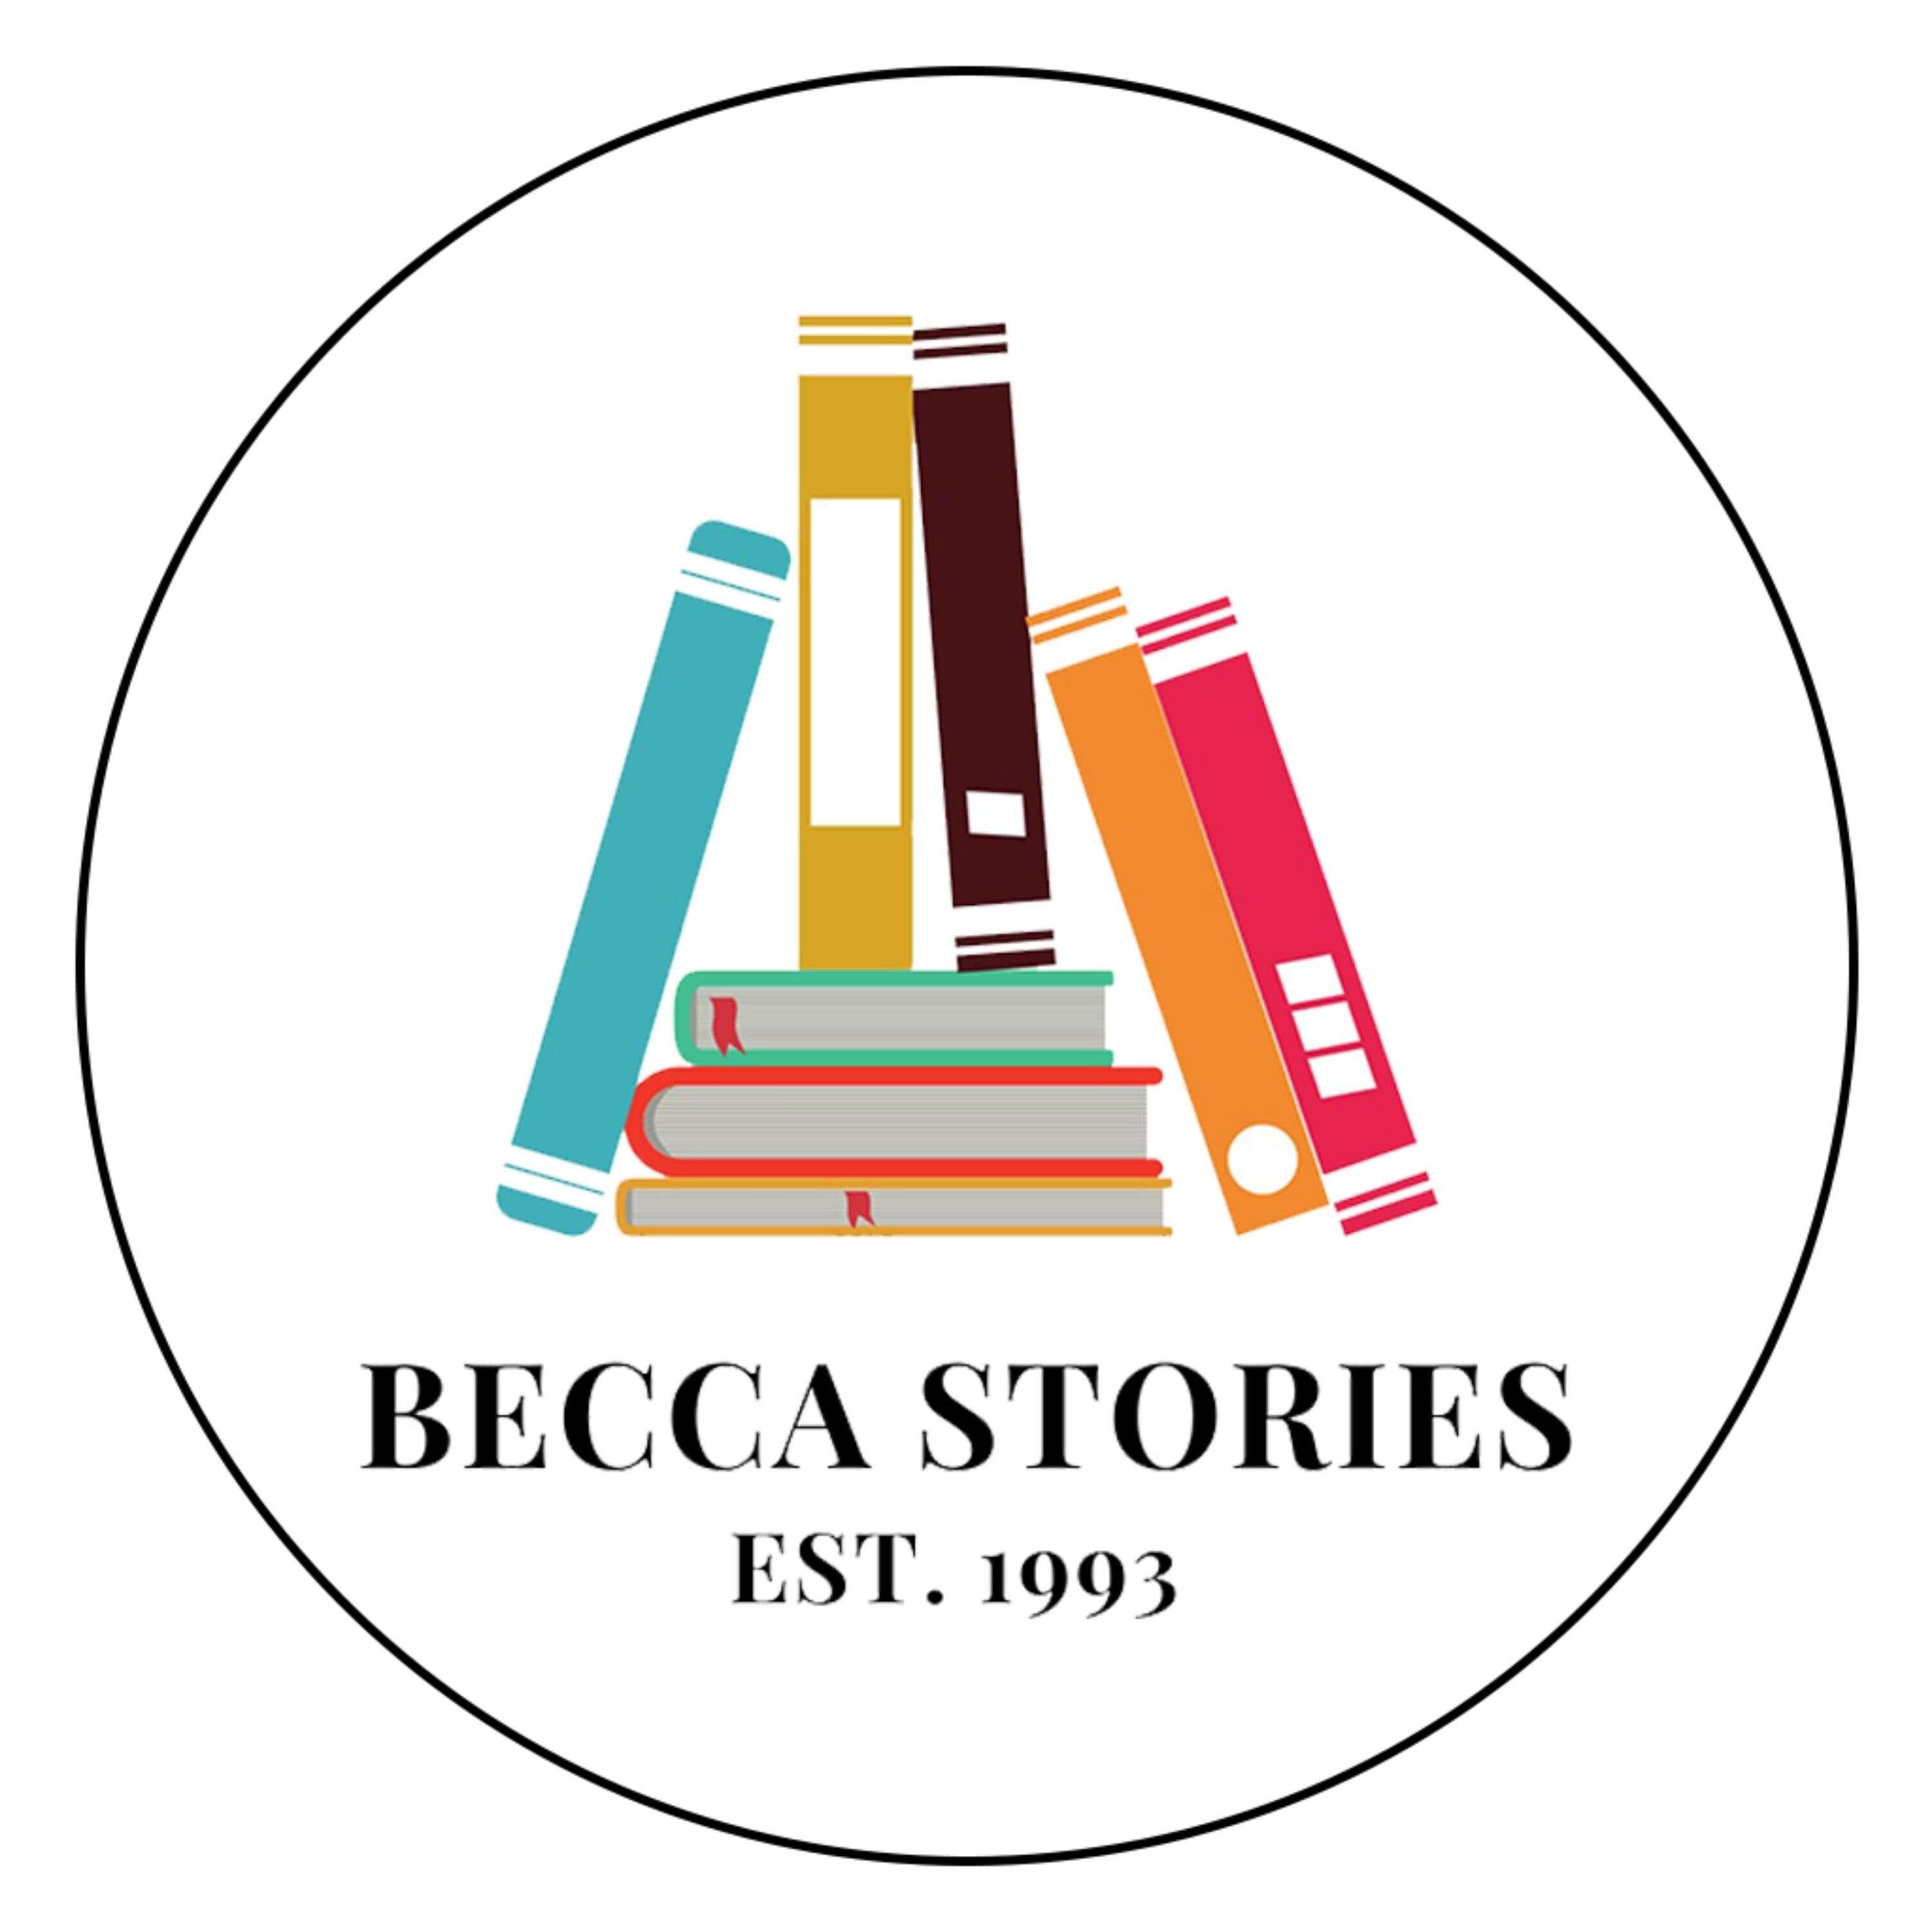 The Becca Stories